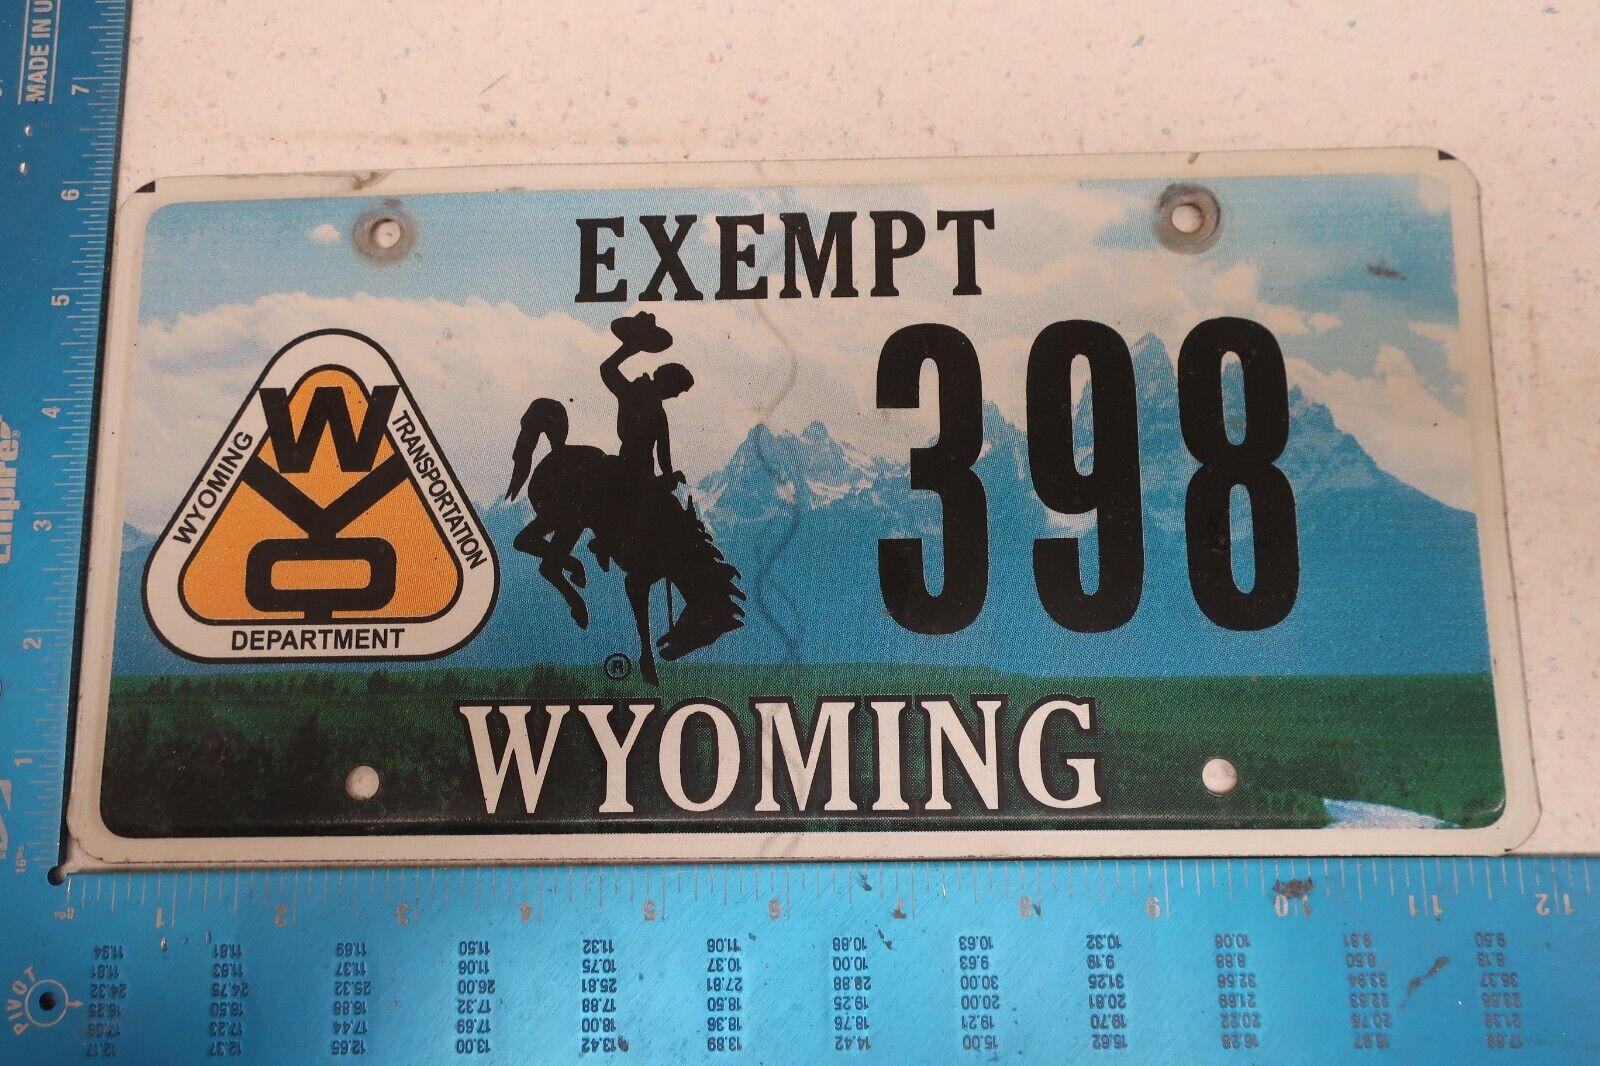 Wyoming Wy Exempt Department Transportation Dot Bucking Bronco License Plate 398